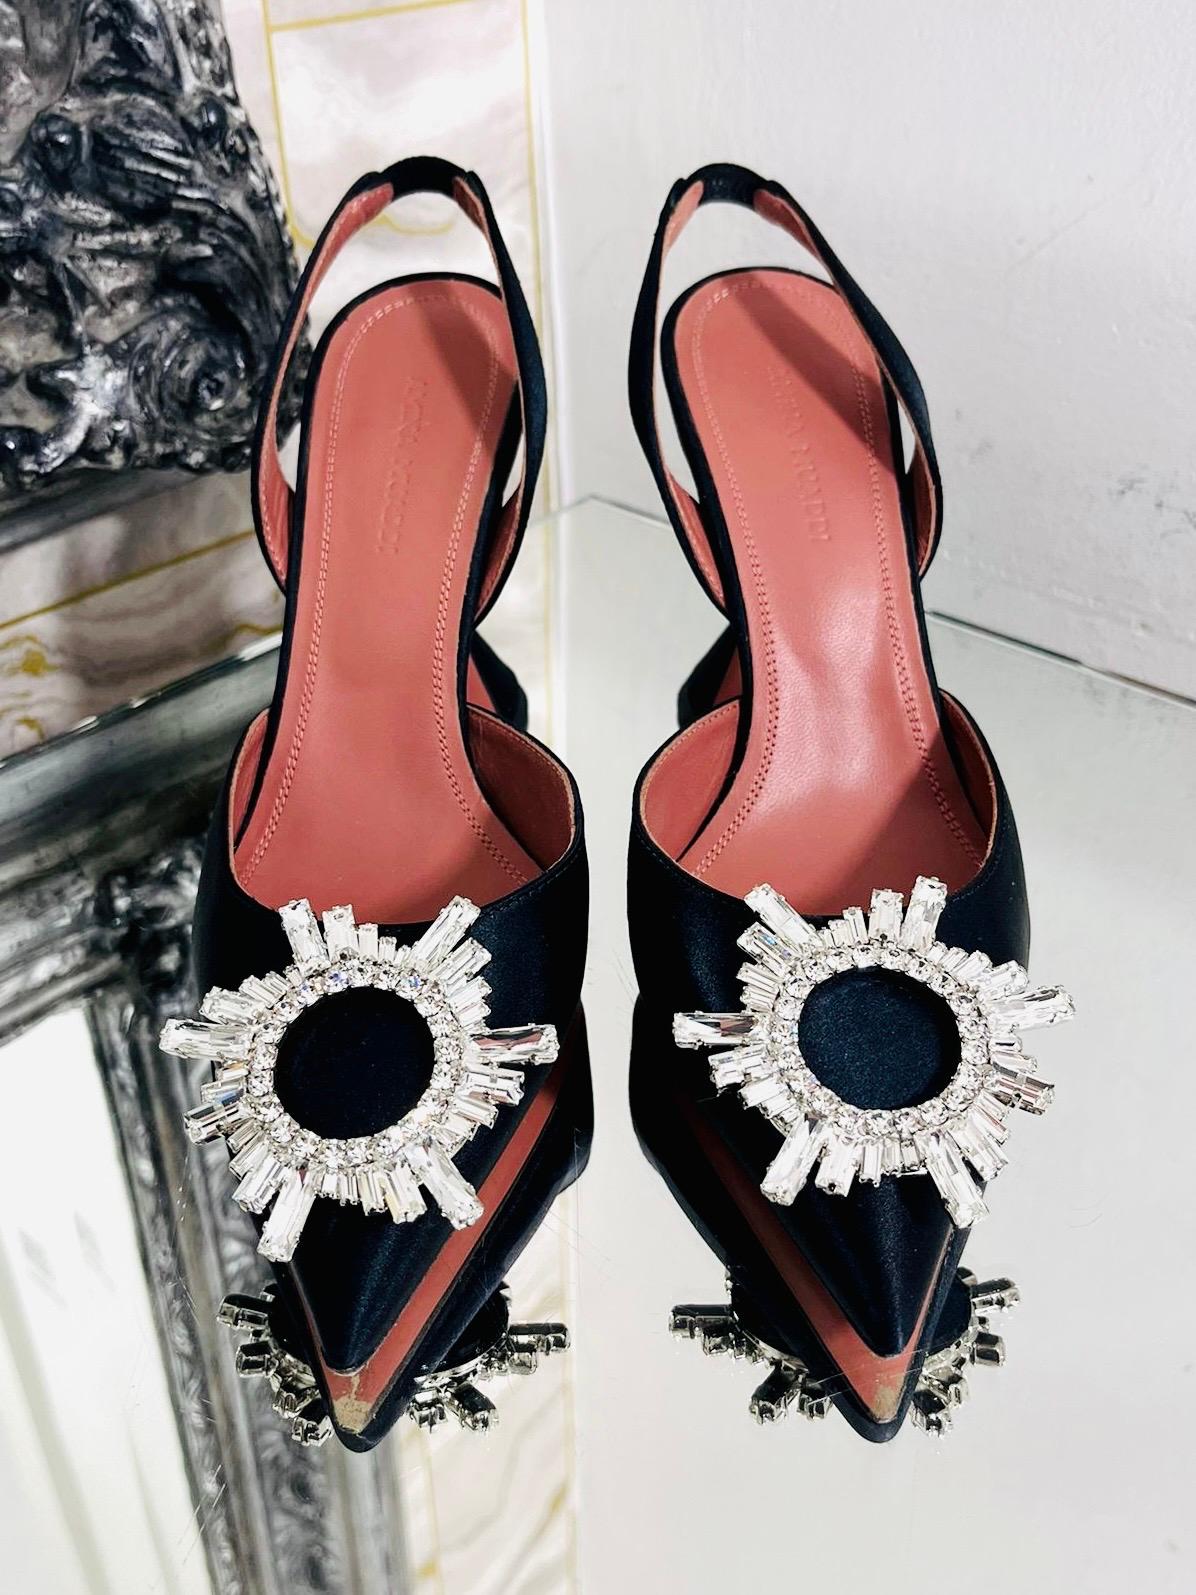 Amina Muaddi Satin & Crystal Heels

Begum satin slingback heels in black with crystal embellished large brooch style

feature to each shoe. Sculptured heels. Rrp £665.

Size - 35.5

Condition - Excellent

Composition - Satin, Crystal

Comes With -